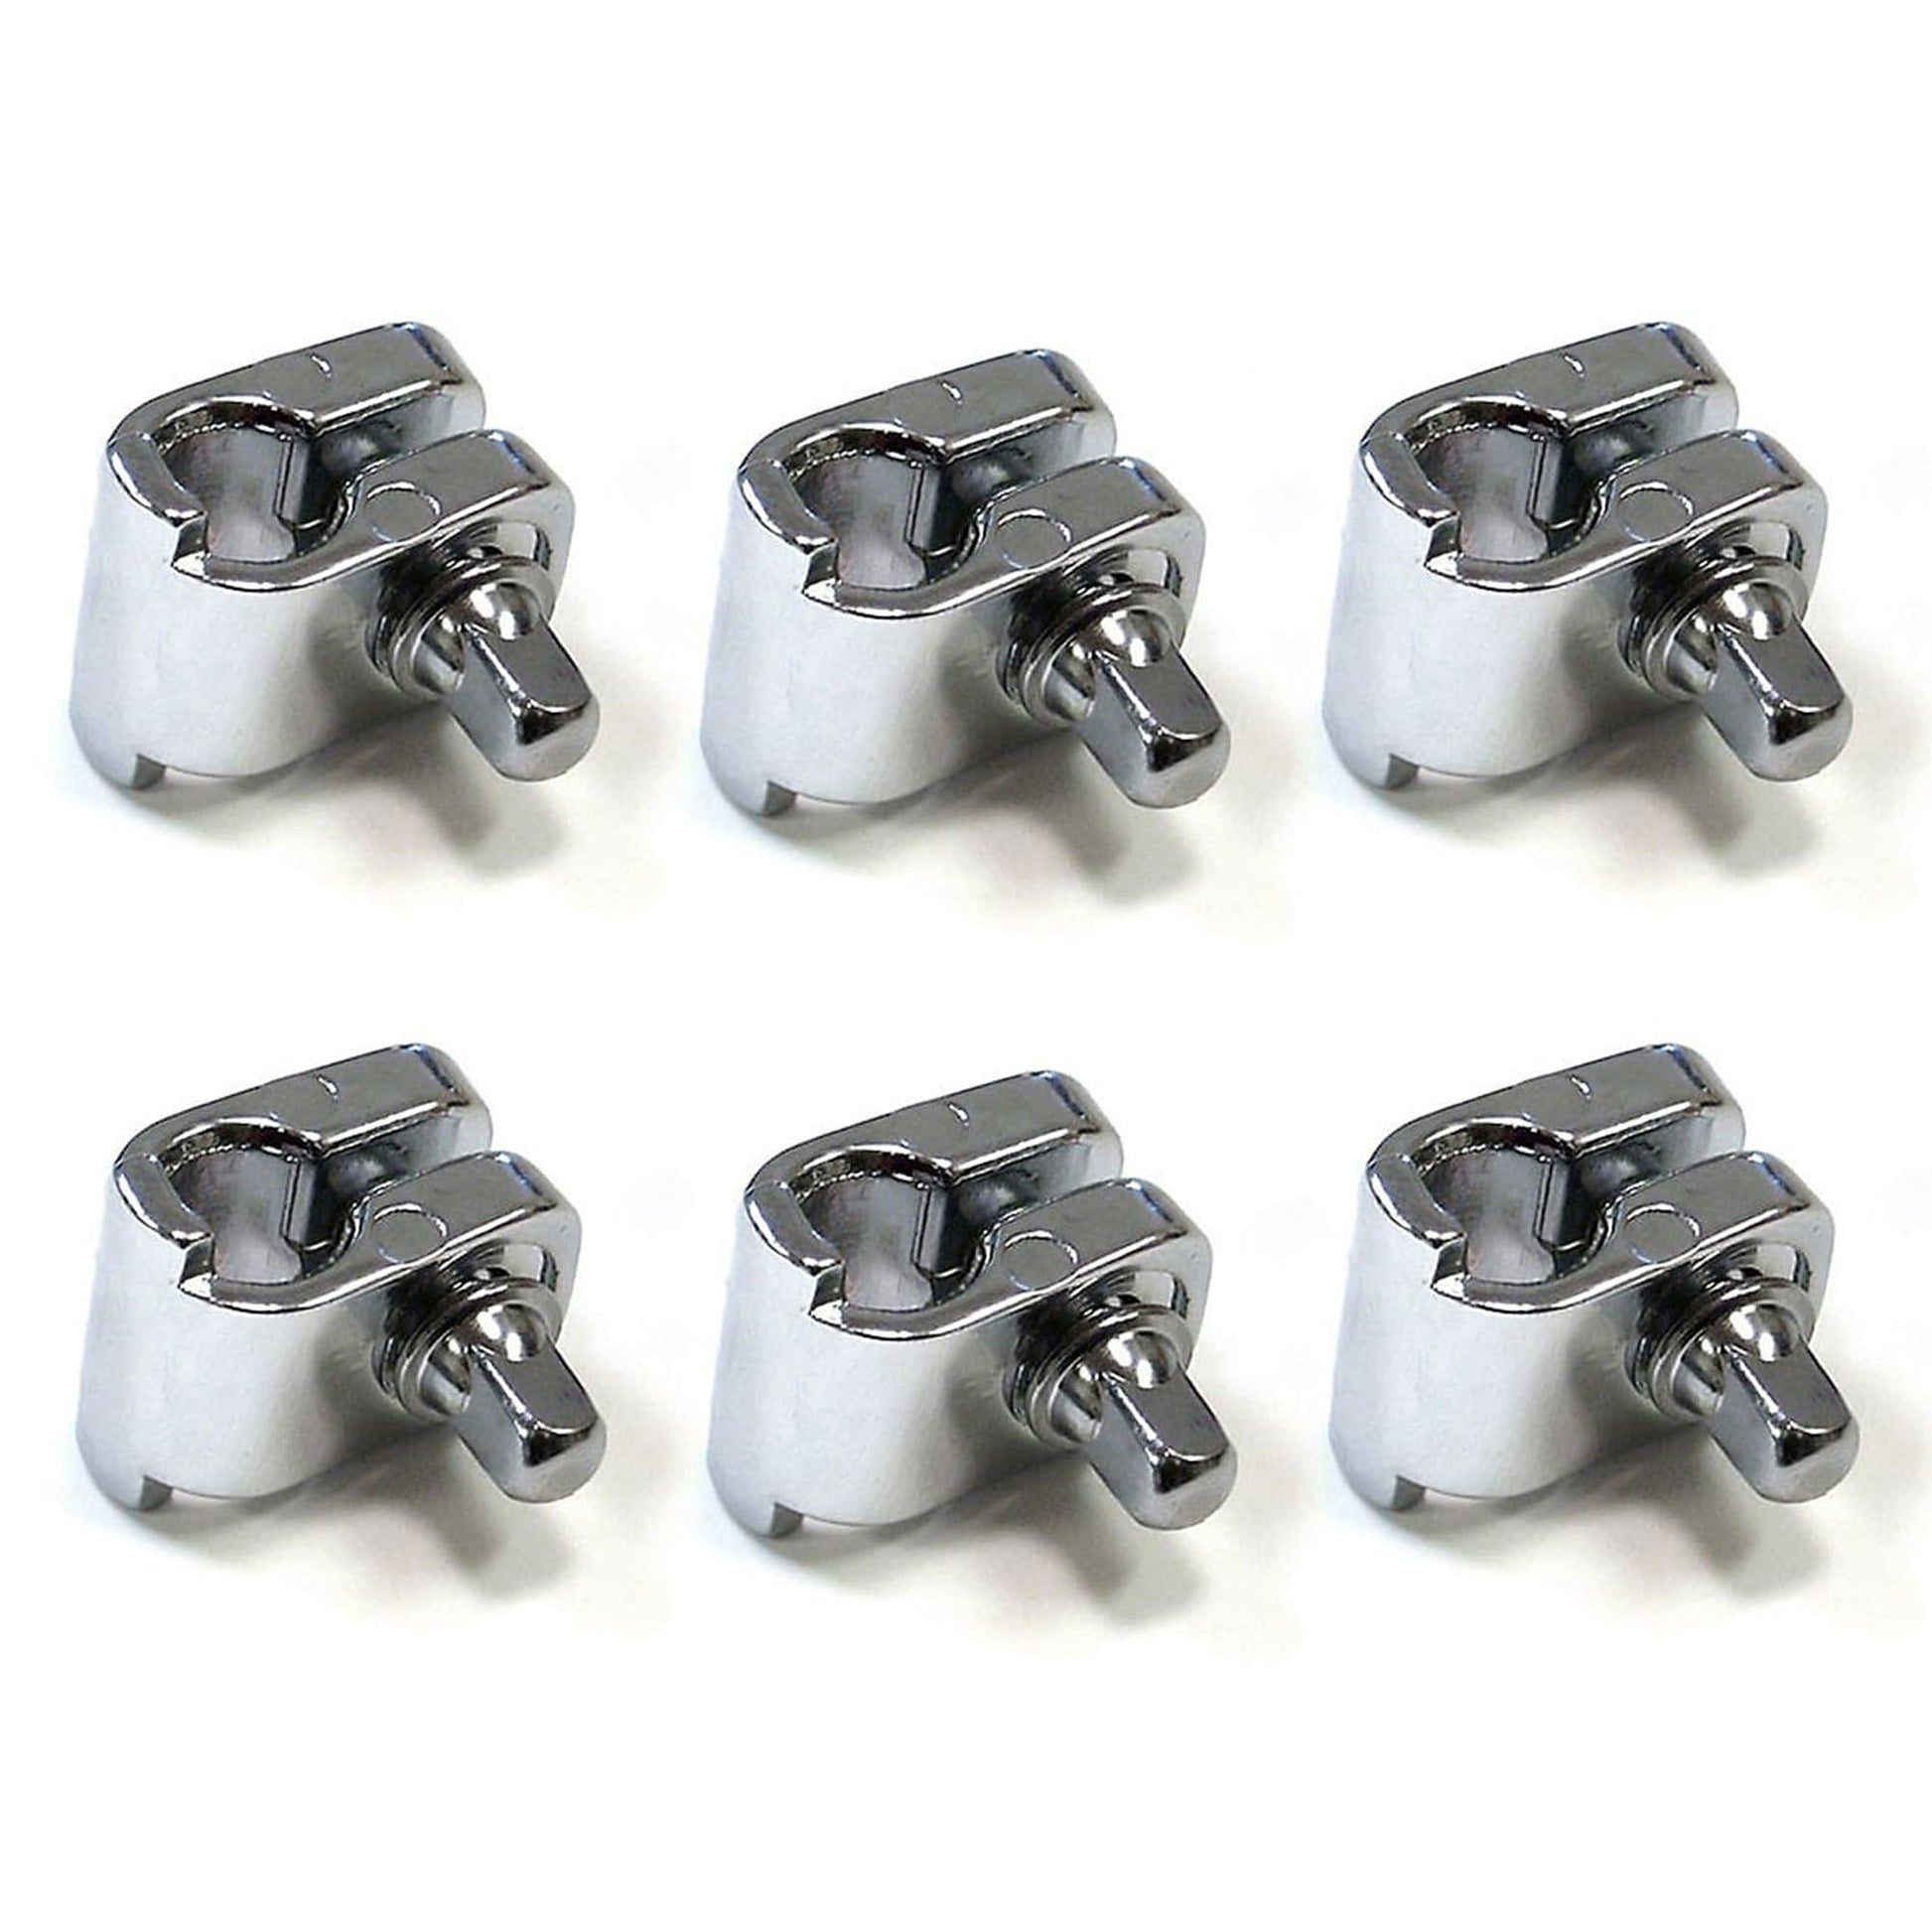 Ludwig Quick Set Memory Lock for L-Arm on 9.5mm Rocker Mounts P1728 6 Pack Bundle Drums and Percussion / Parts and Accessories / Drum Parts